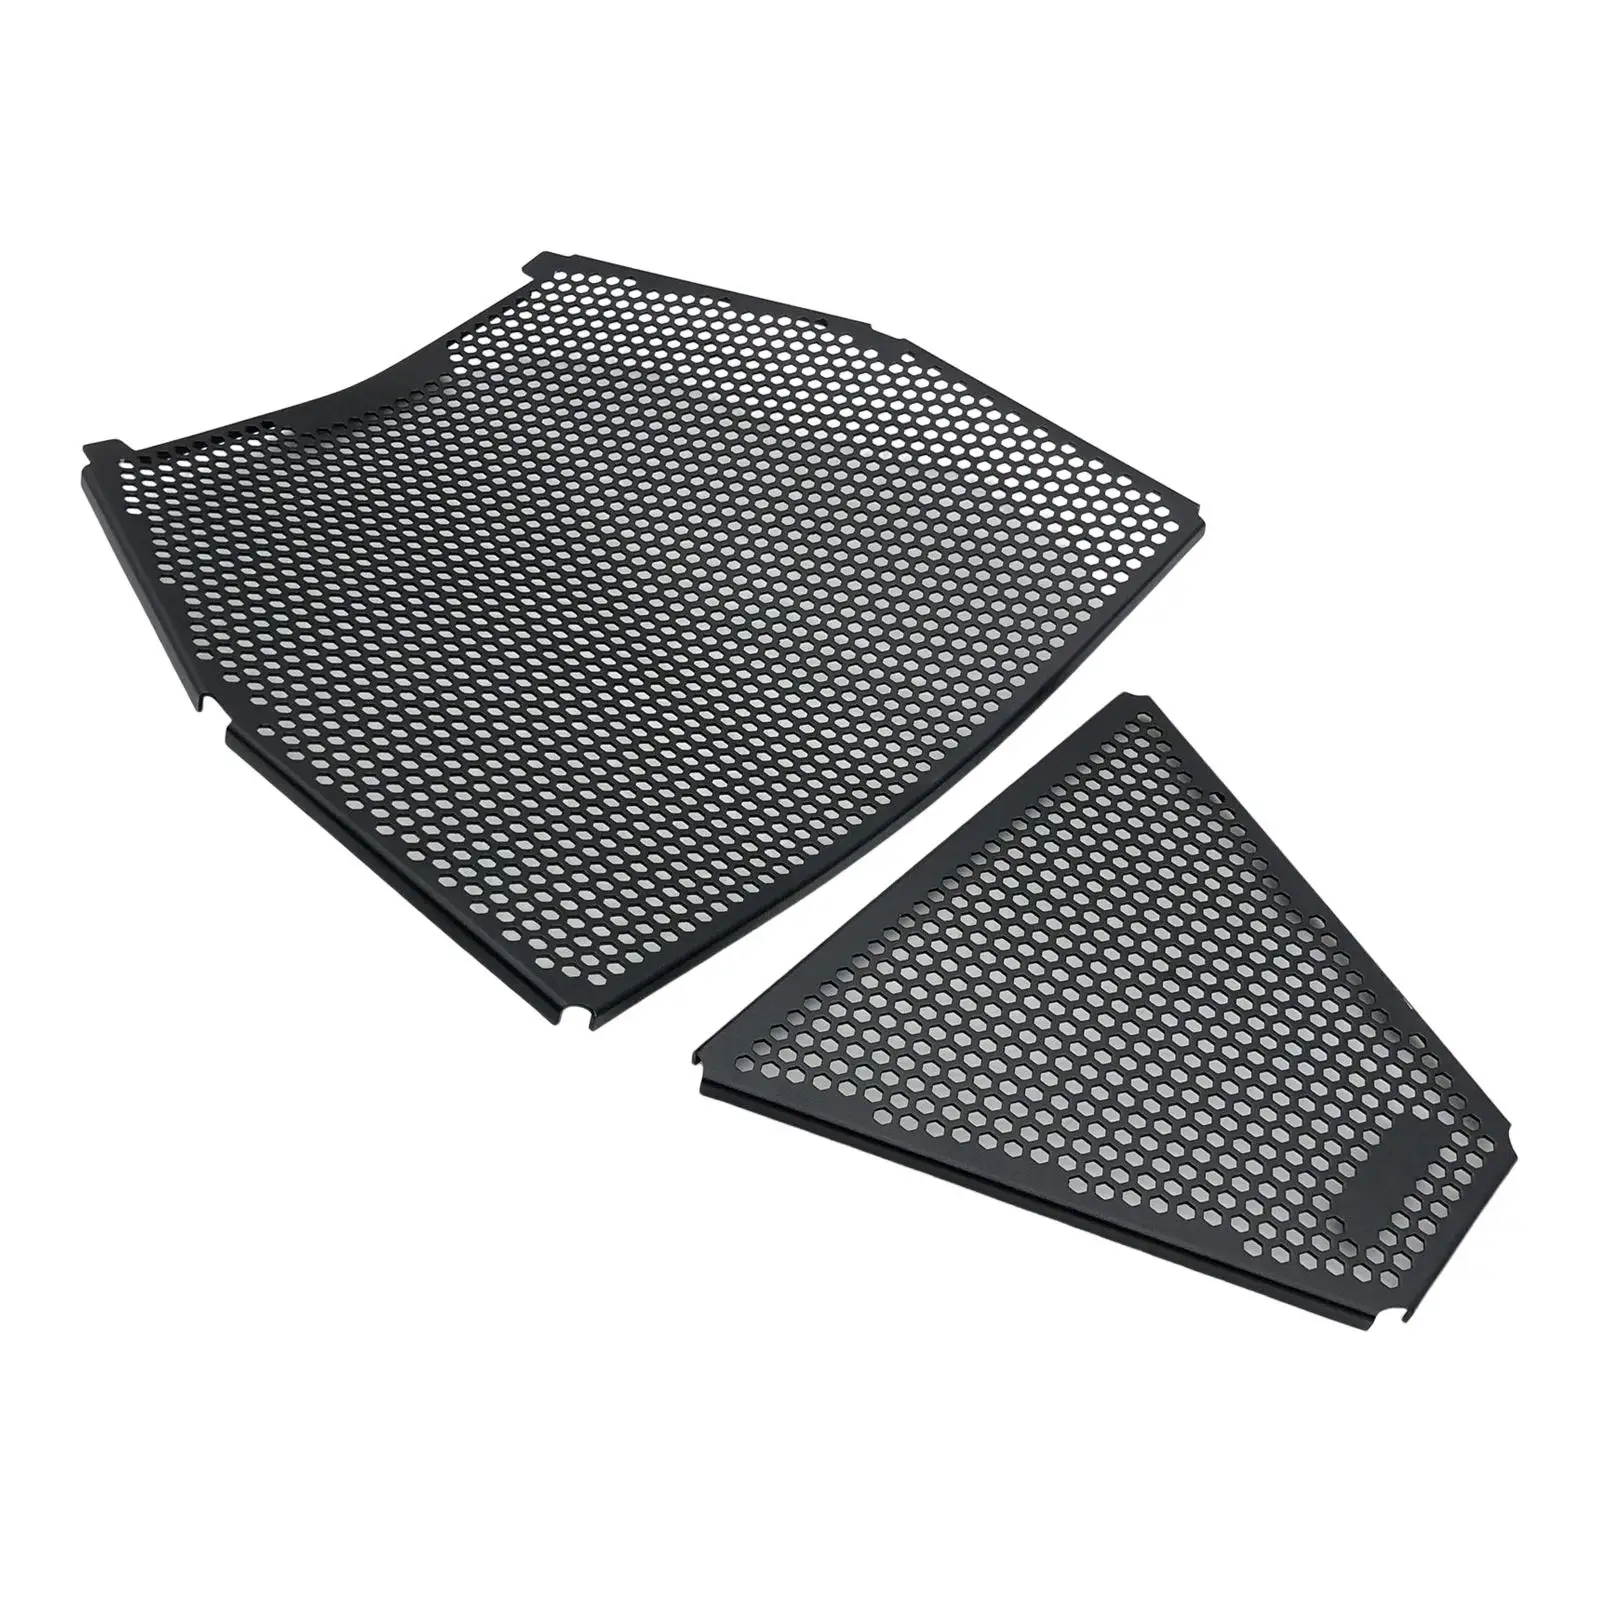 Motorcycle Radiator Grille Guard Protective Cover for Ducati Panigle V4